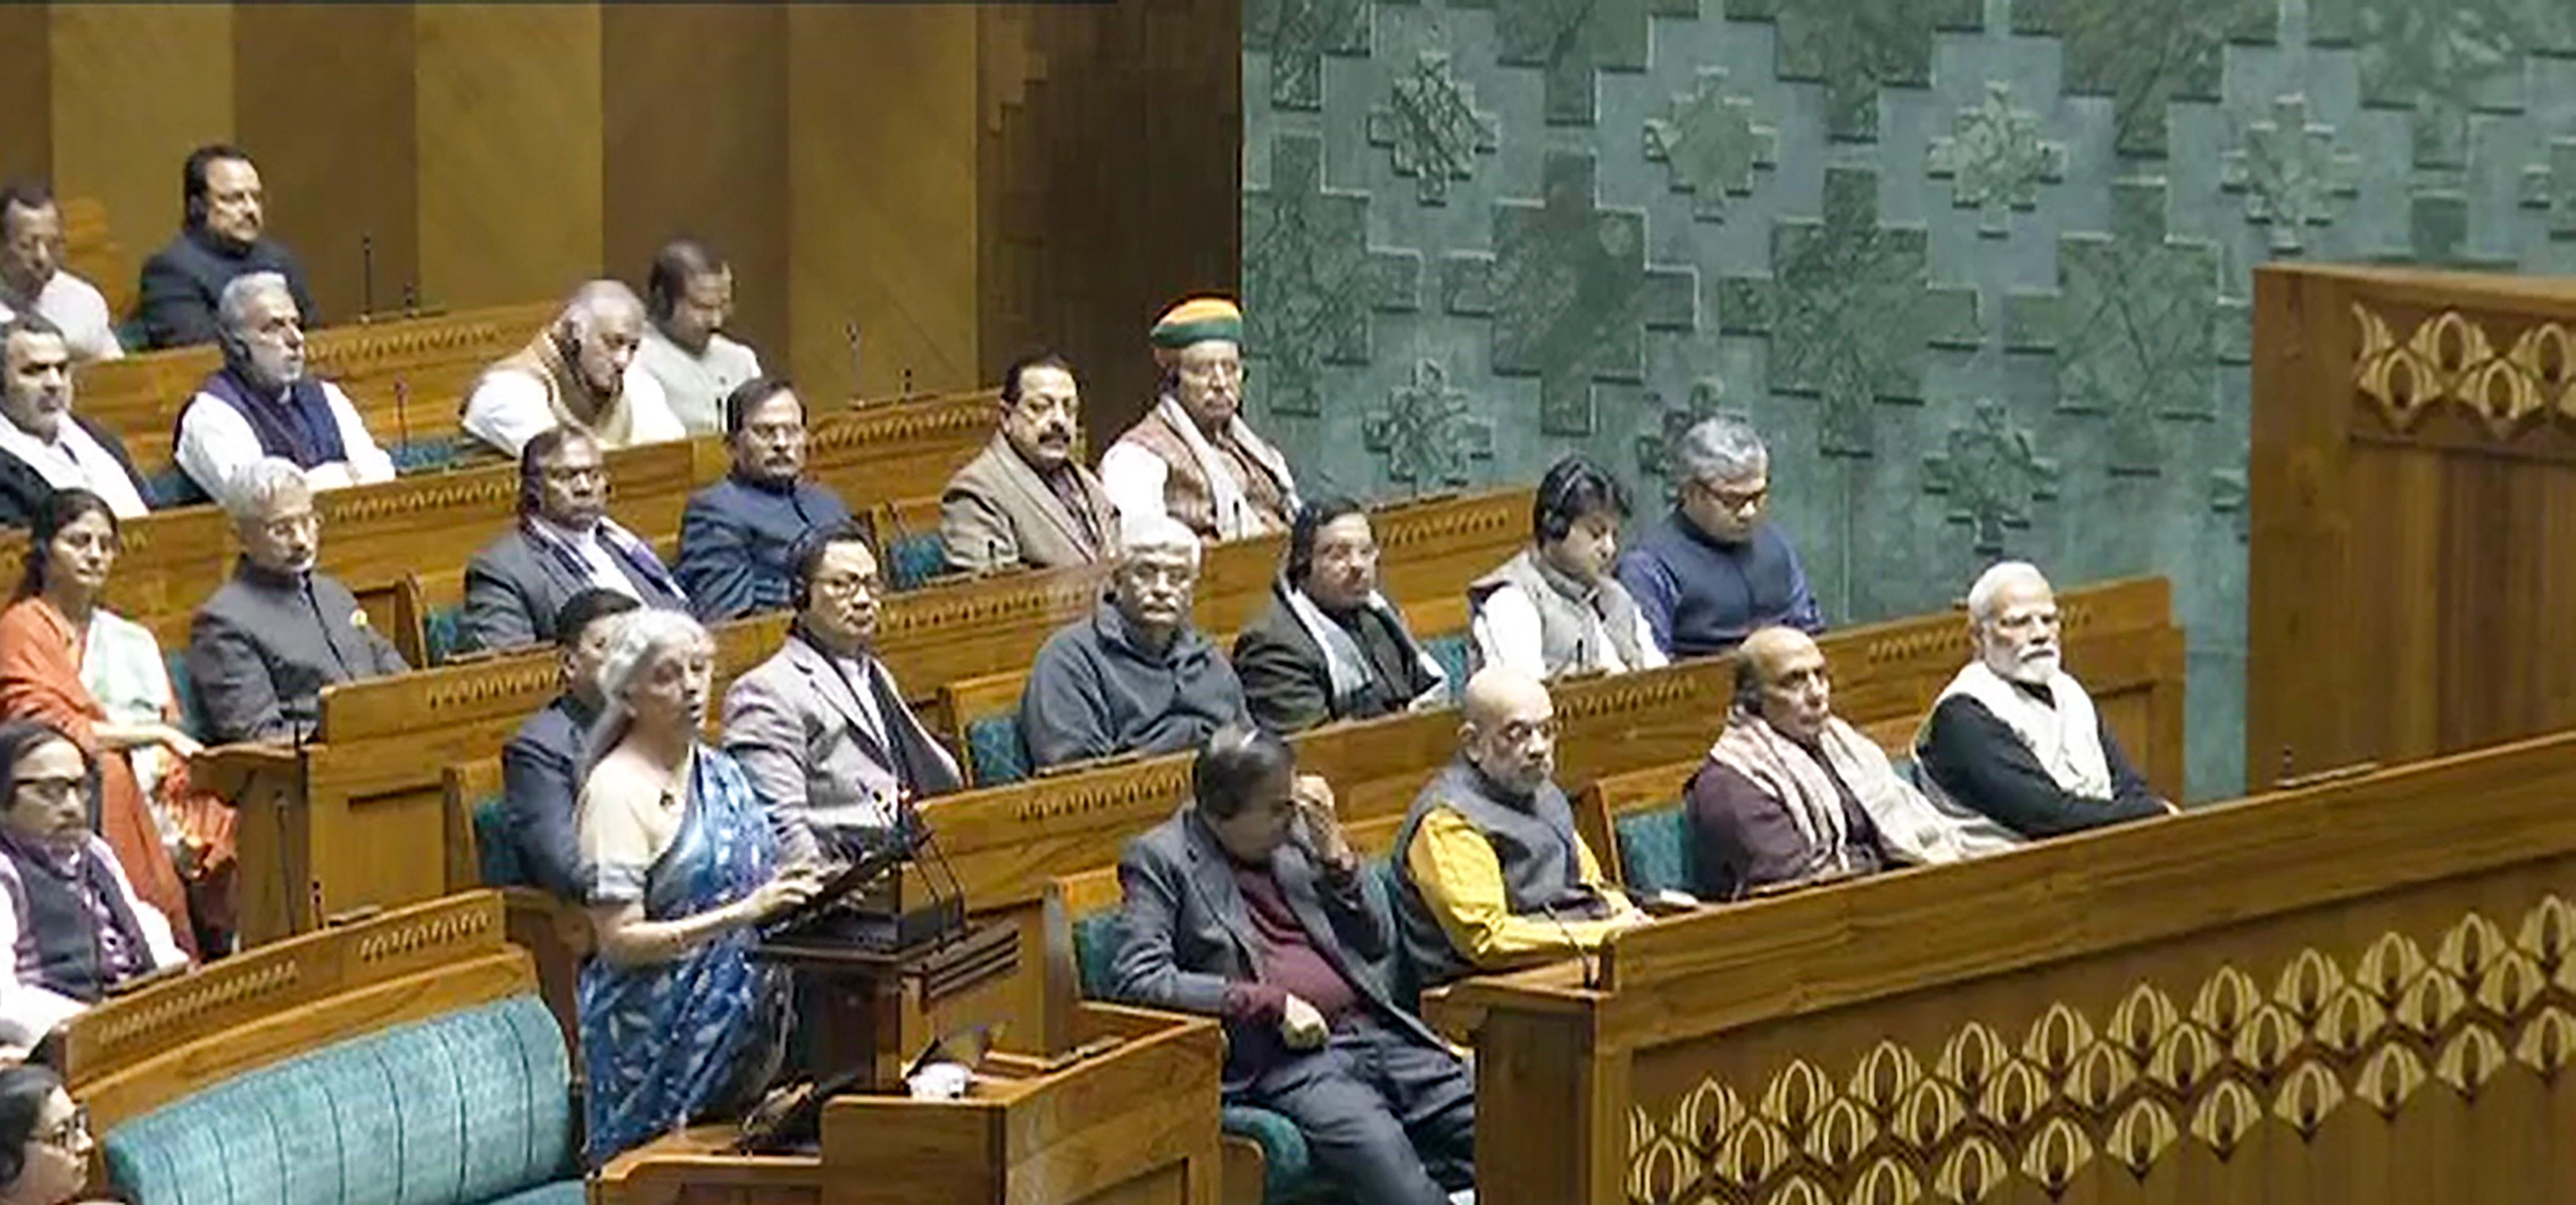 To address fervour for domestic tourism, projects for port connectivity, tourism infra and amenities will be taken on our islands including Lakshadweep: Finance Minister Nirmala Sitharaman in her interim Budget speech